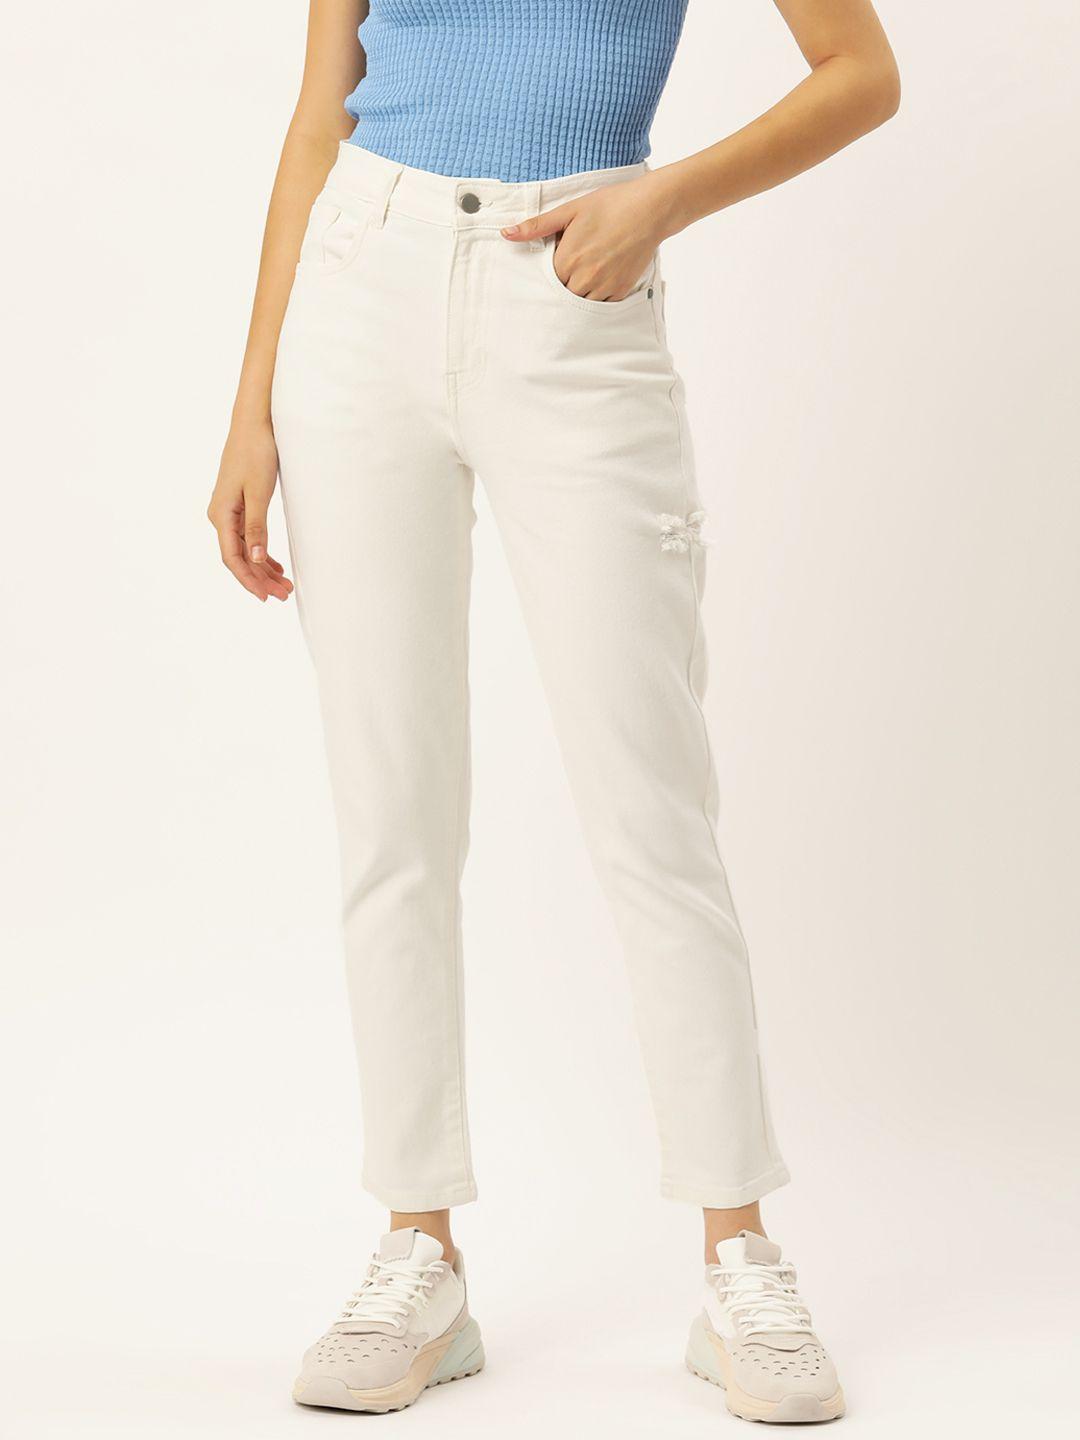 dressberry-women-high-rise-cropped-jeans